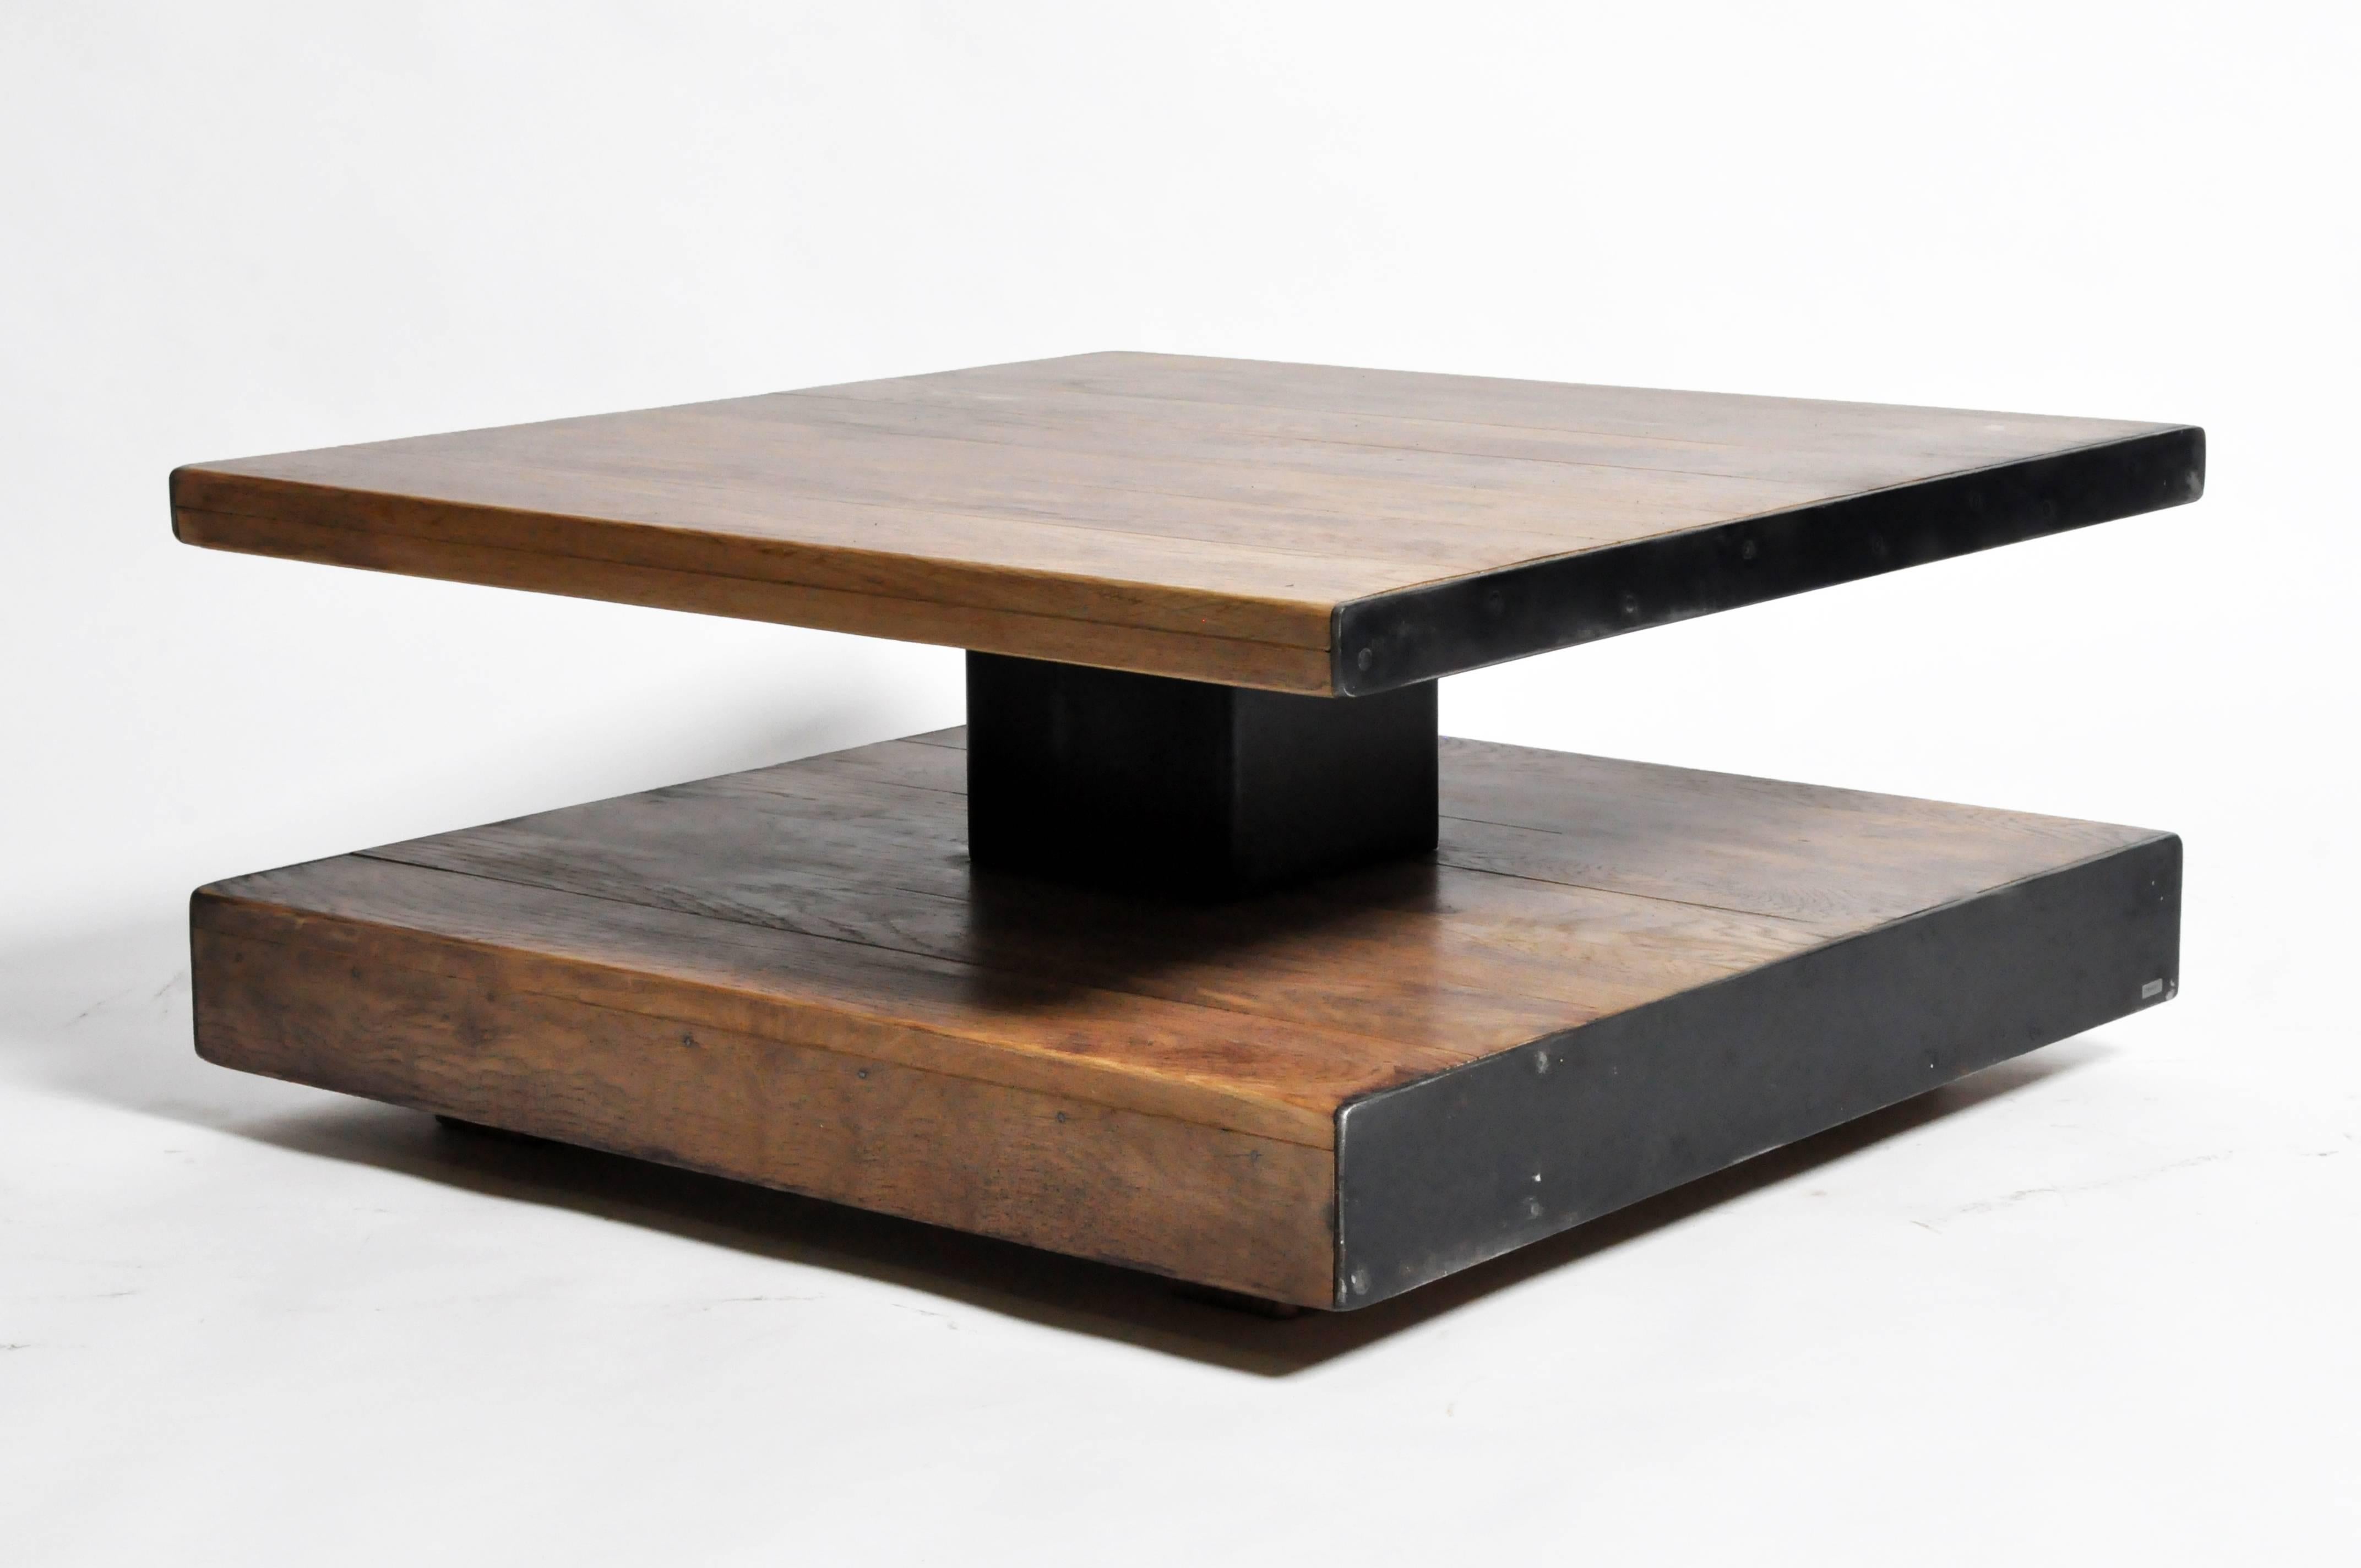 This recently made square coffee table is from Paris, France and was made from oak wood and iron, c. 2017